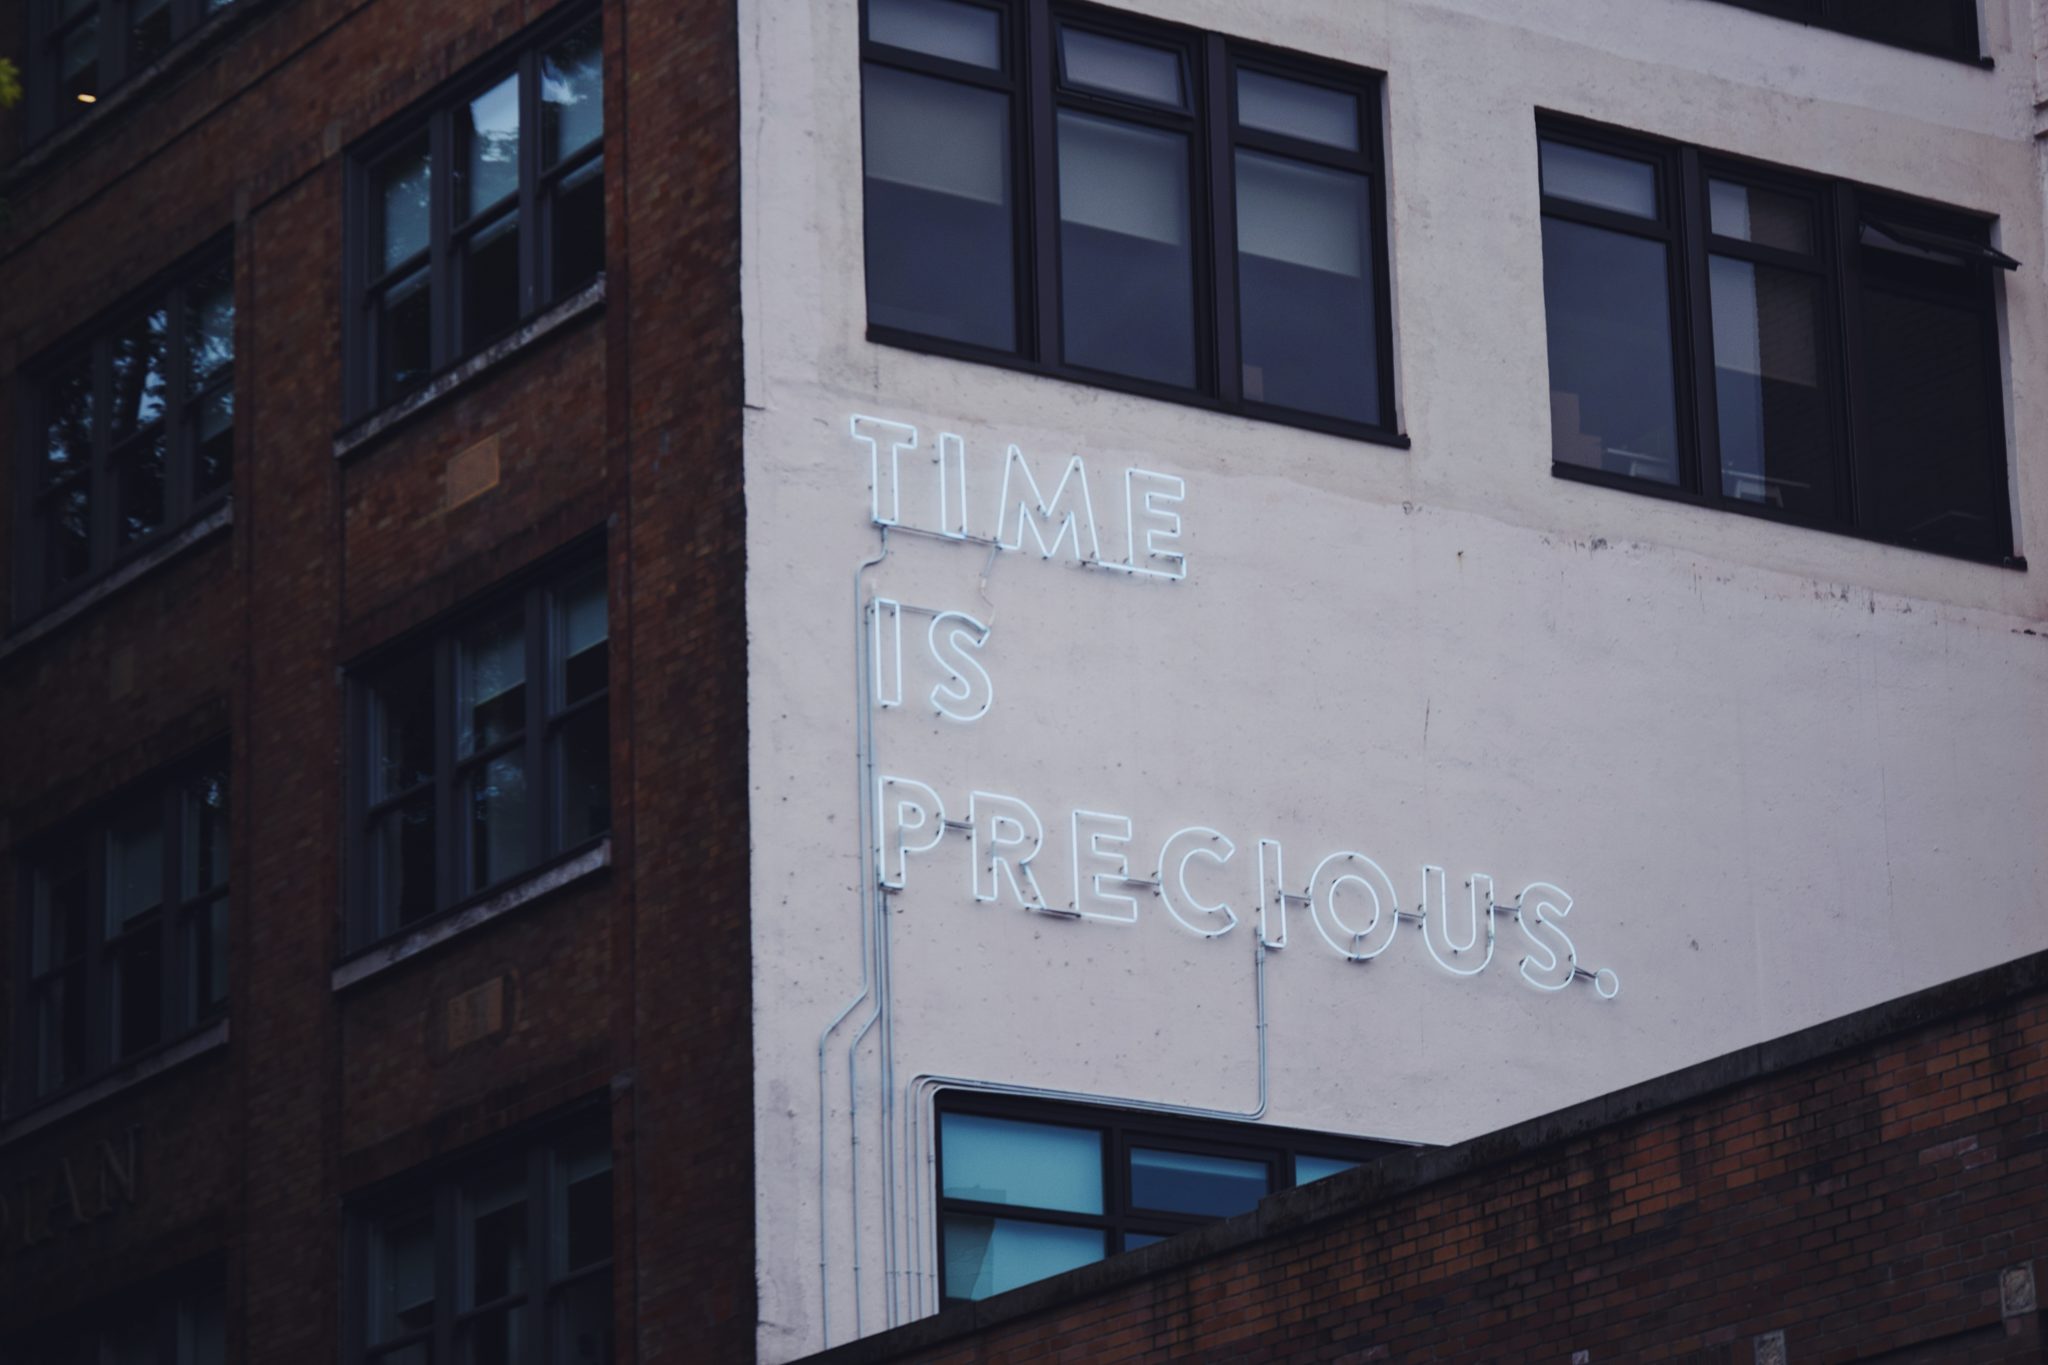 The words "Time is precious" in lights on the side of a building